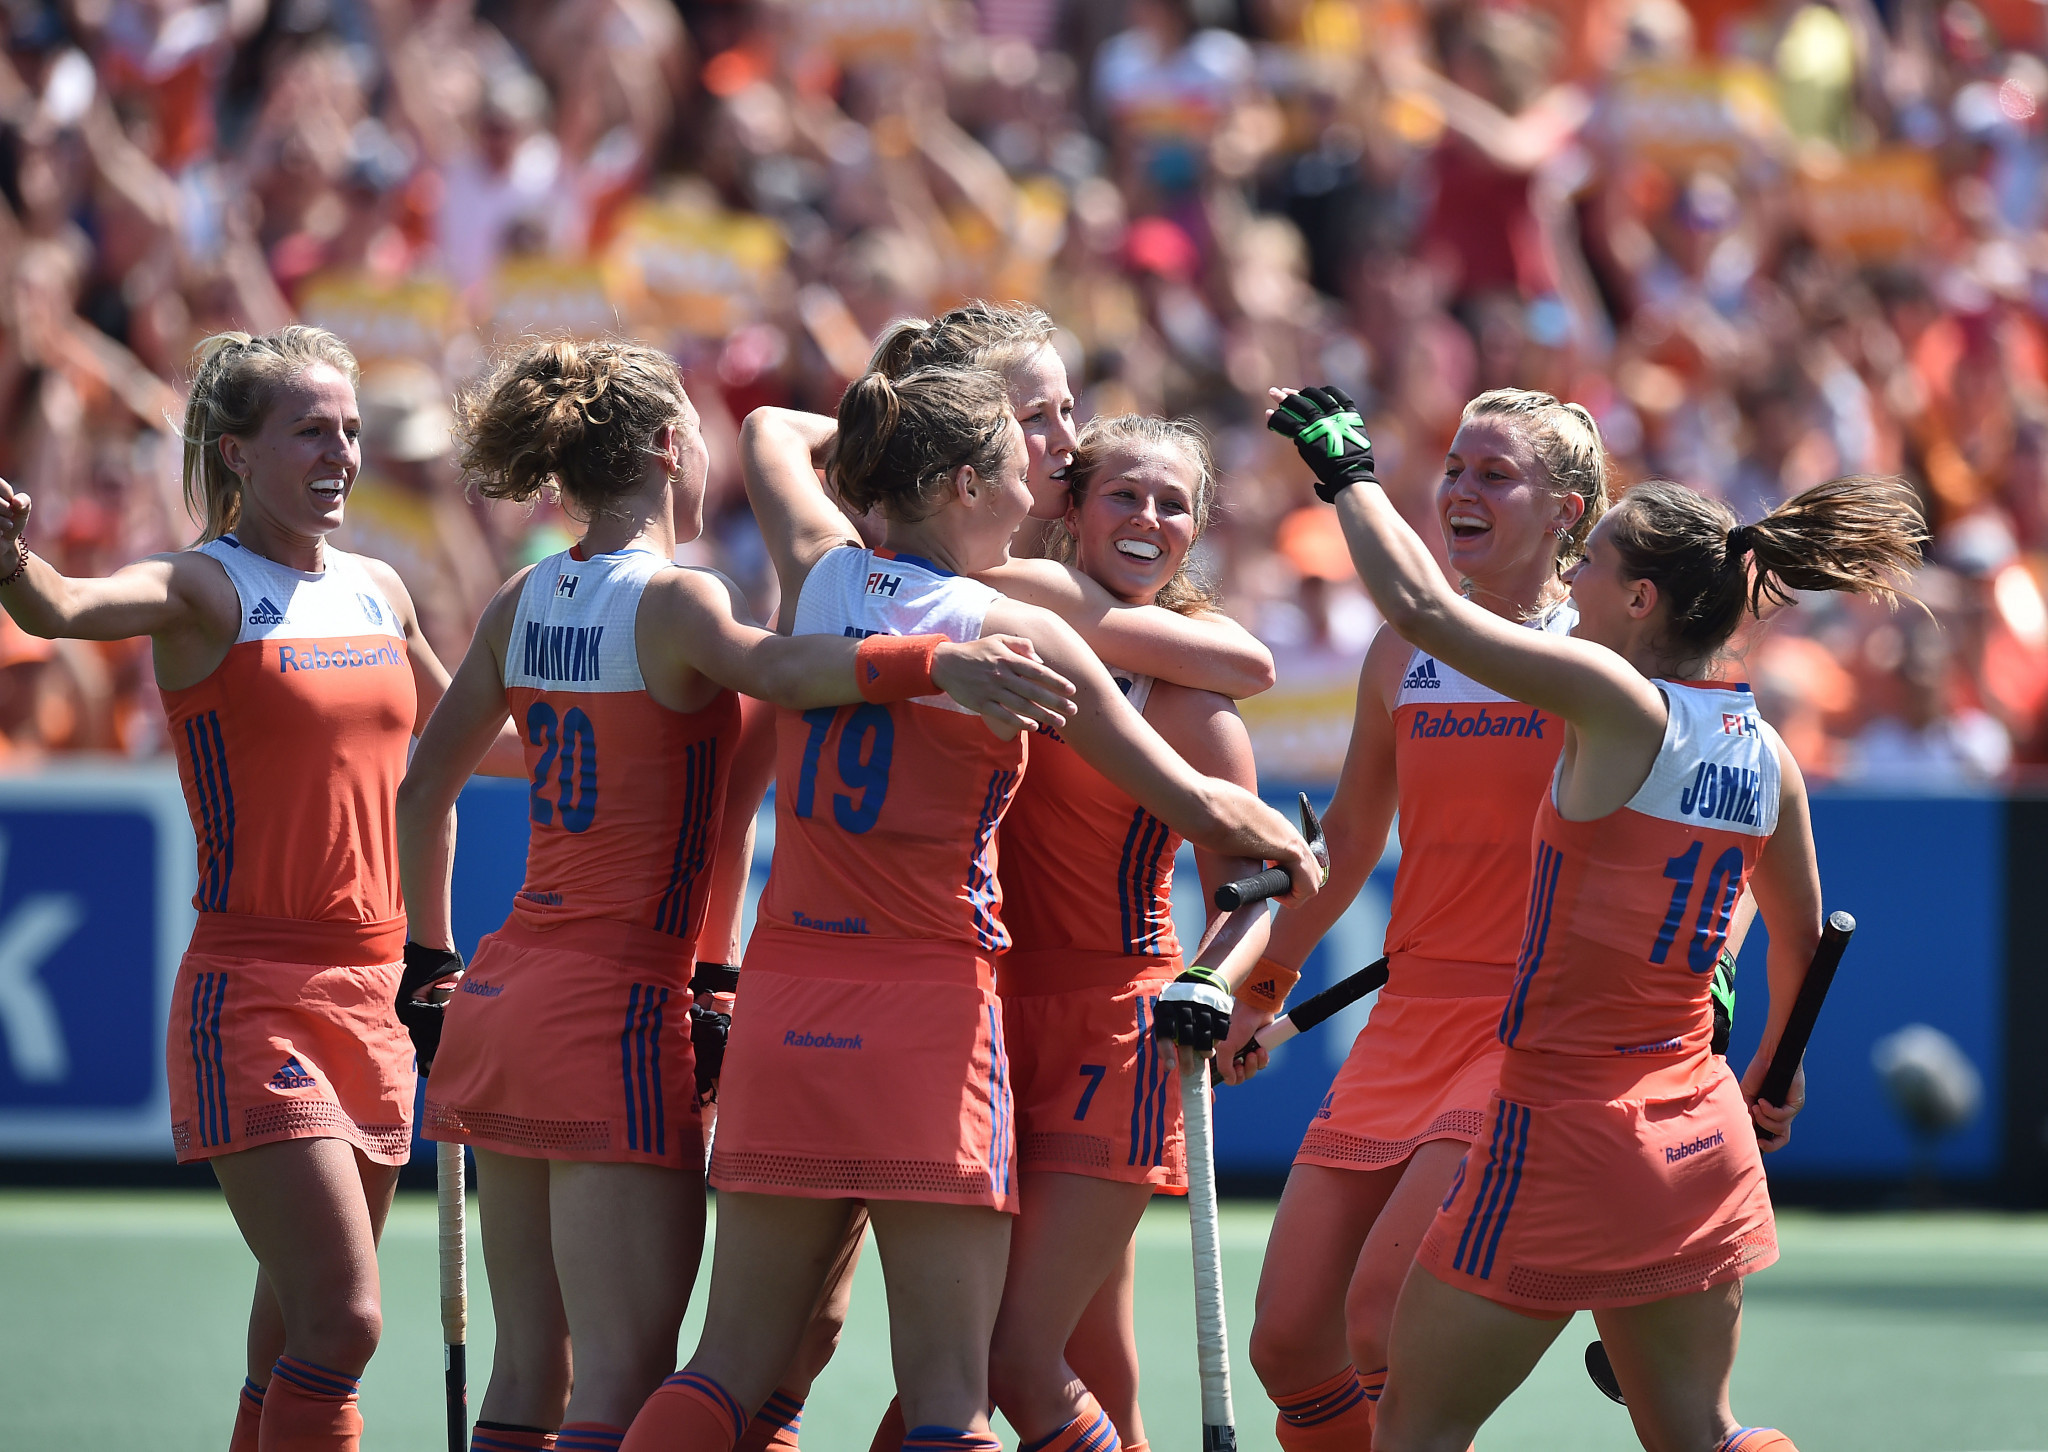 The Dutch women will take some stopping on home soil after their superb league campaign ©Getty Images